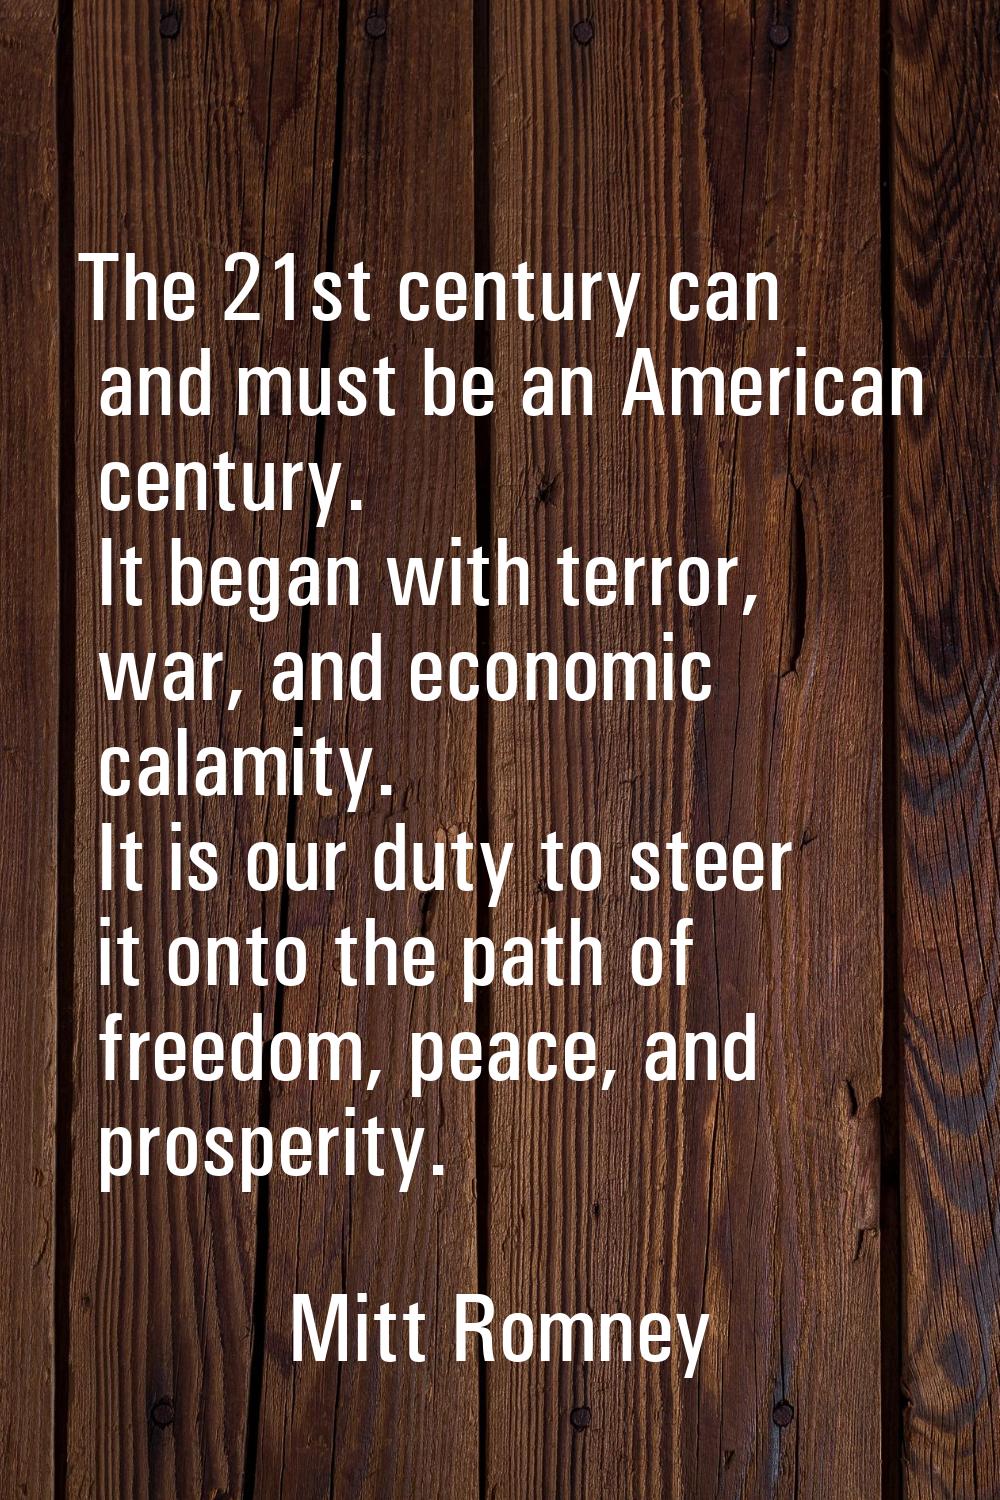 The 21st century can and must be an American century. It began with terror, war, and economic calam